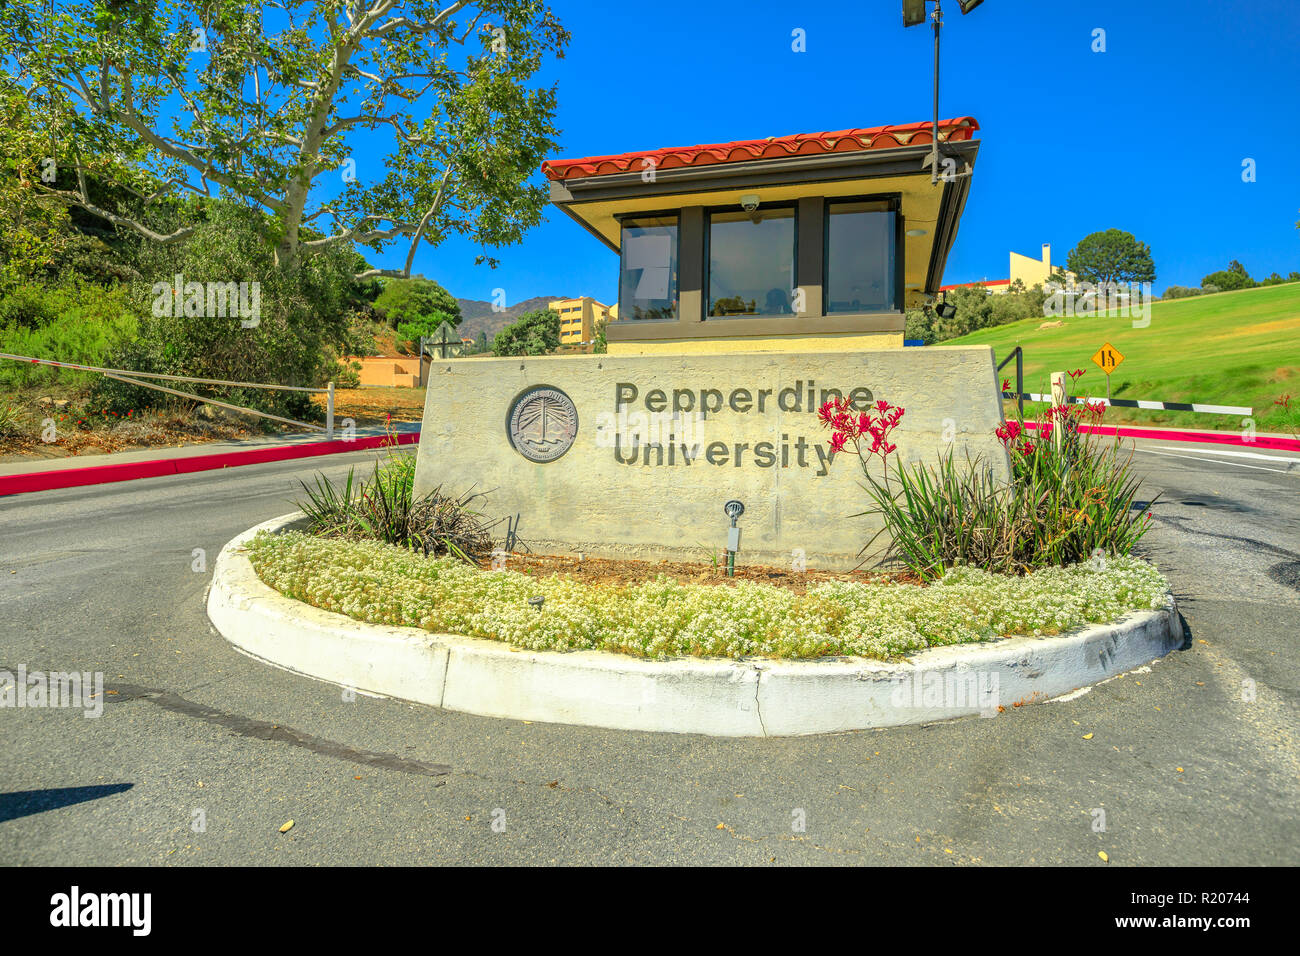 Malibu, California, United States - August 7, 2018: Pepperdine University Sign Entrance, a private American university in Malibu, California. The main campus on the hills overlooking the Pacific Ocean Stock Photo